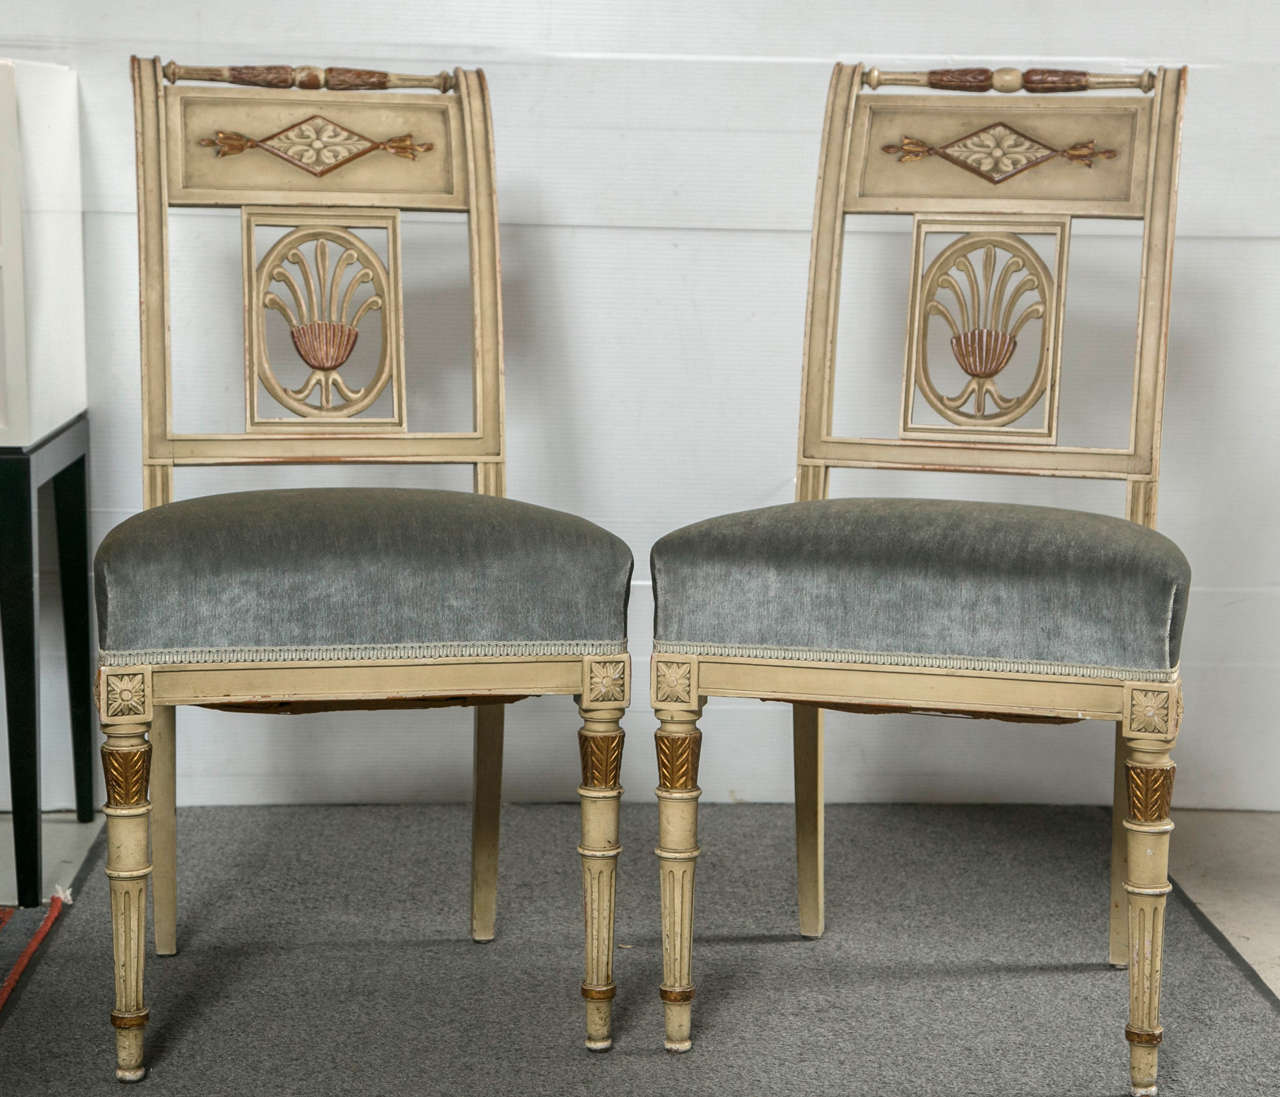 A fine set of six Hollywood Regency style dining chairs finely painted with gilt gold highlights. Each of these wonderful Maison Jansen chairs have tapering legs terminating in gilt capitals supporting a velour stuffed seat leading to square backs